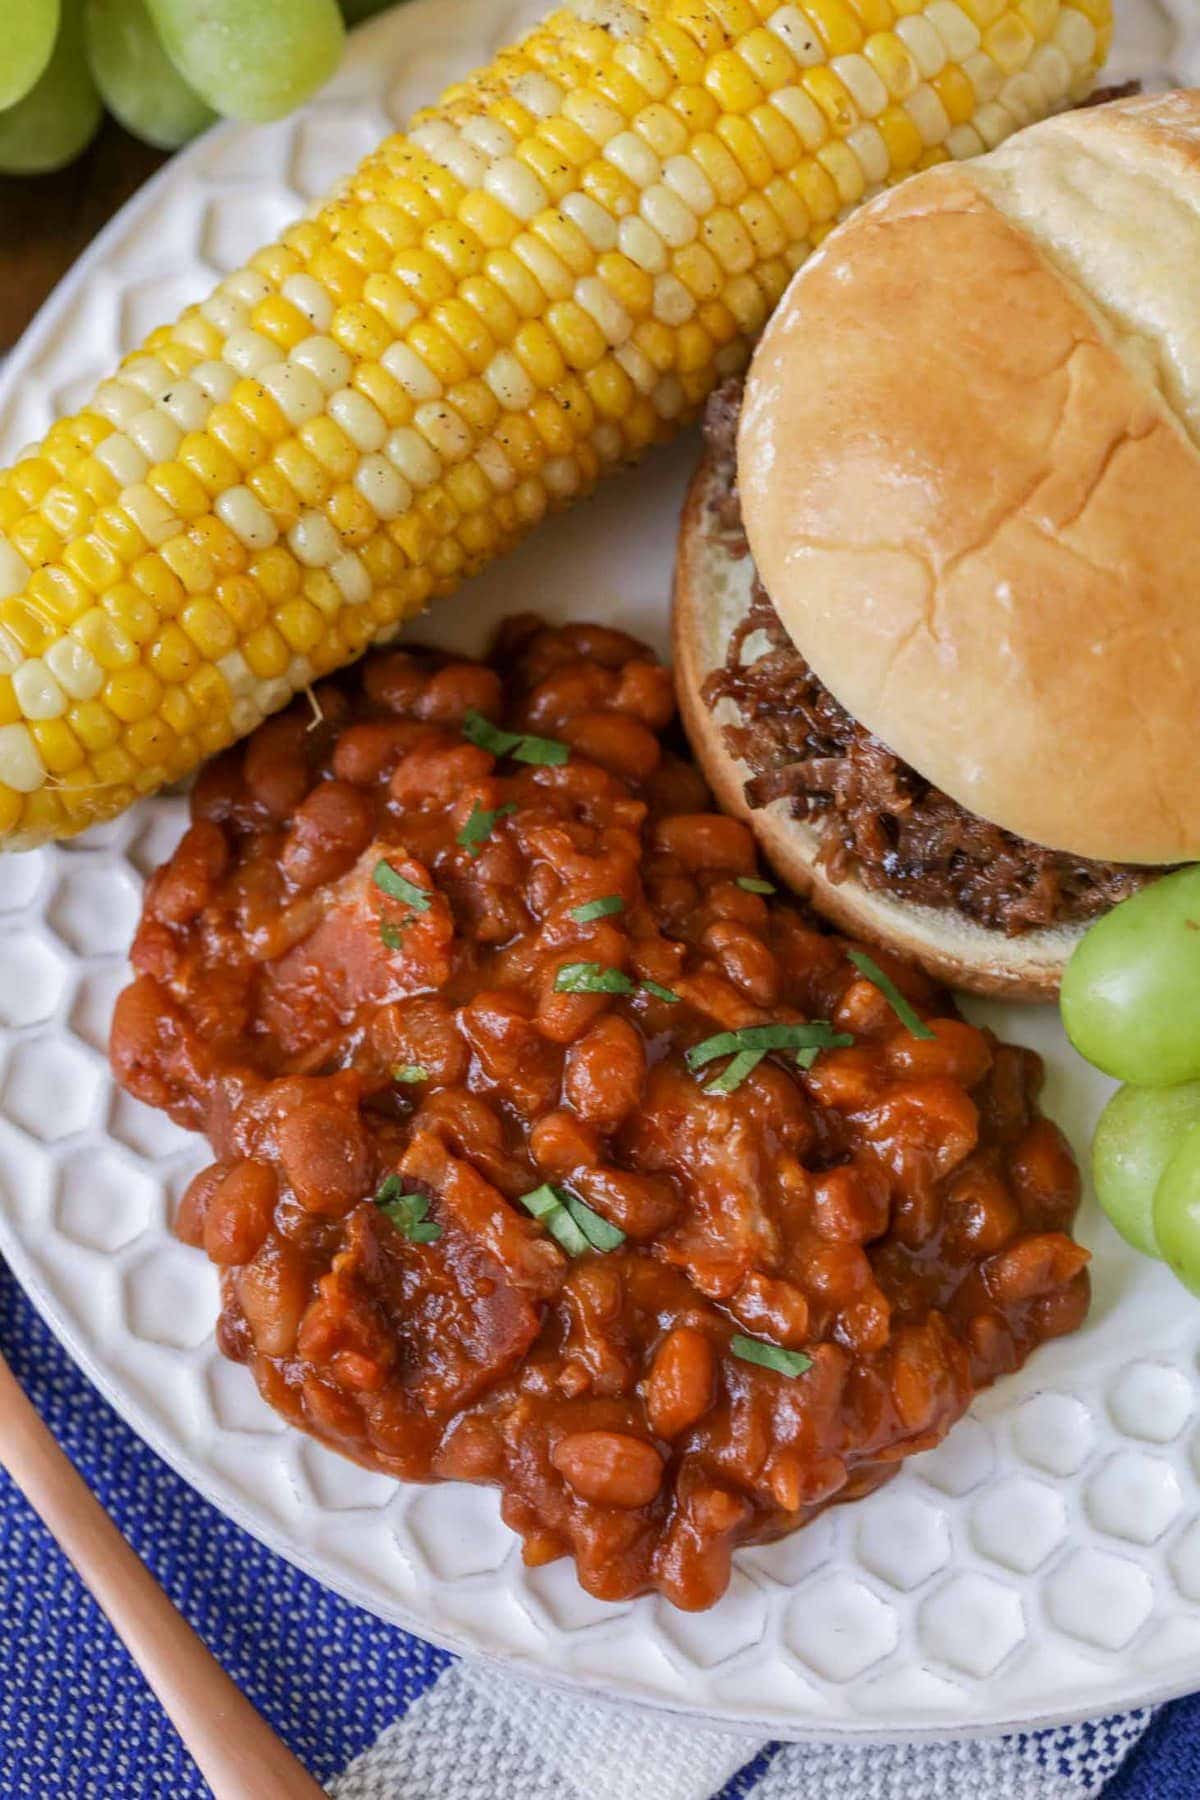 Homemade Baked Beans Recipe served with Pulled Pork sandwiches.